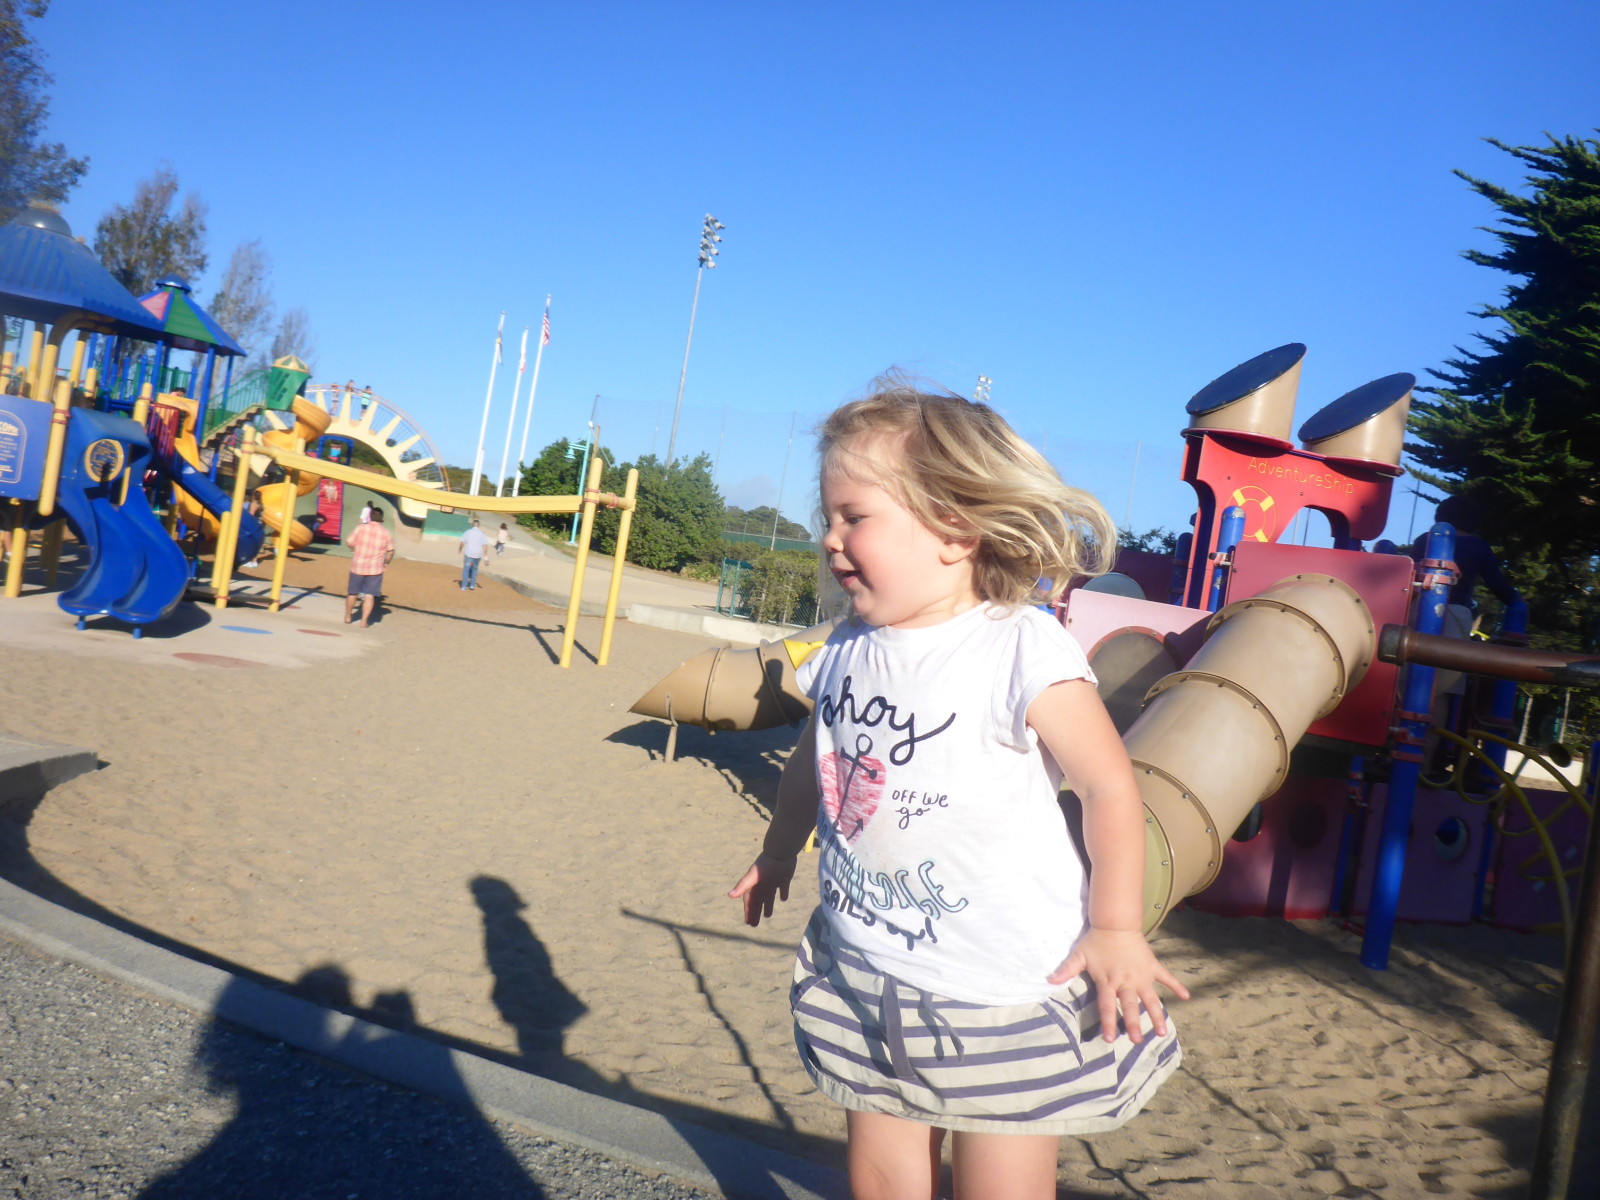 Great playground - she didn't stop moving